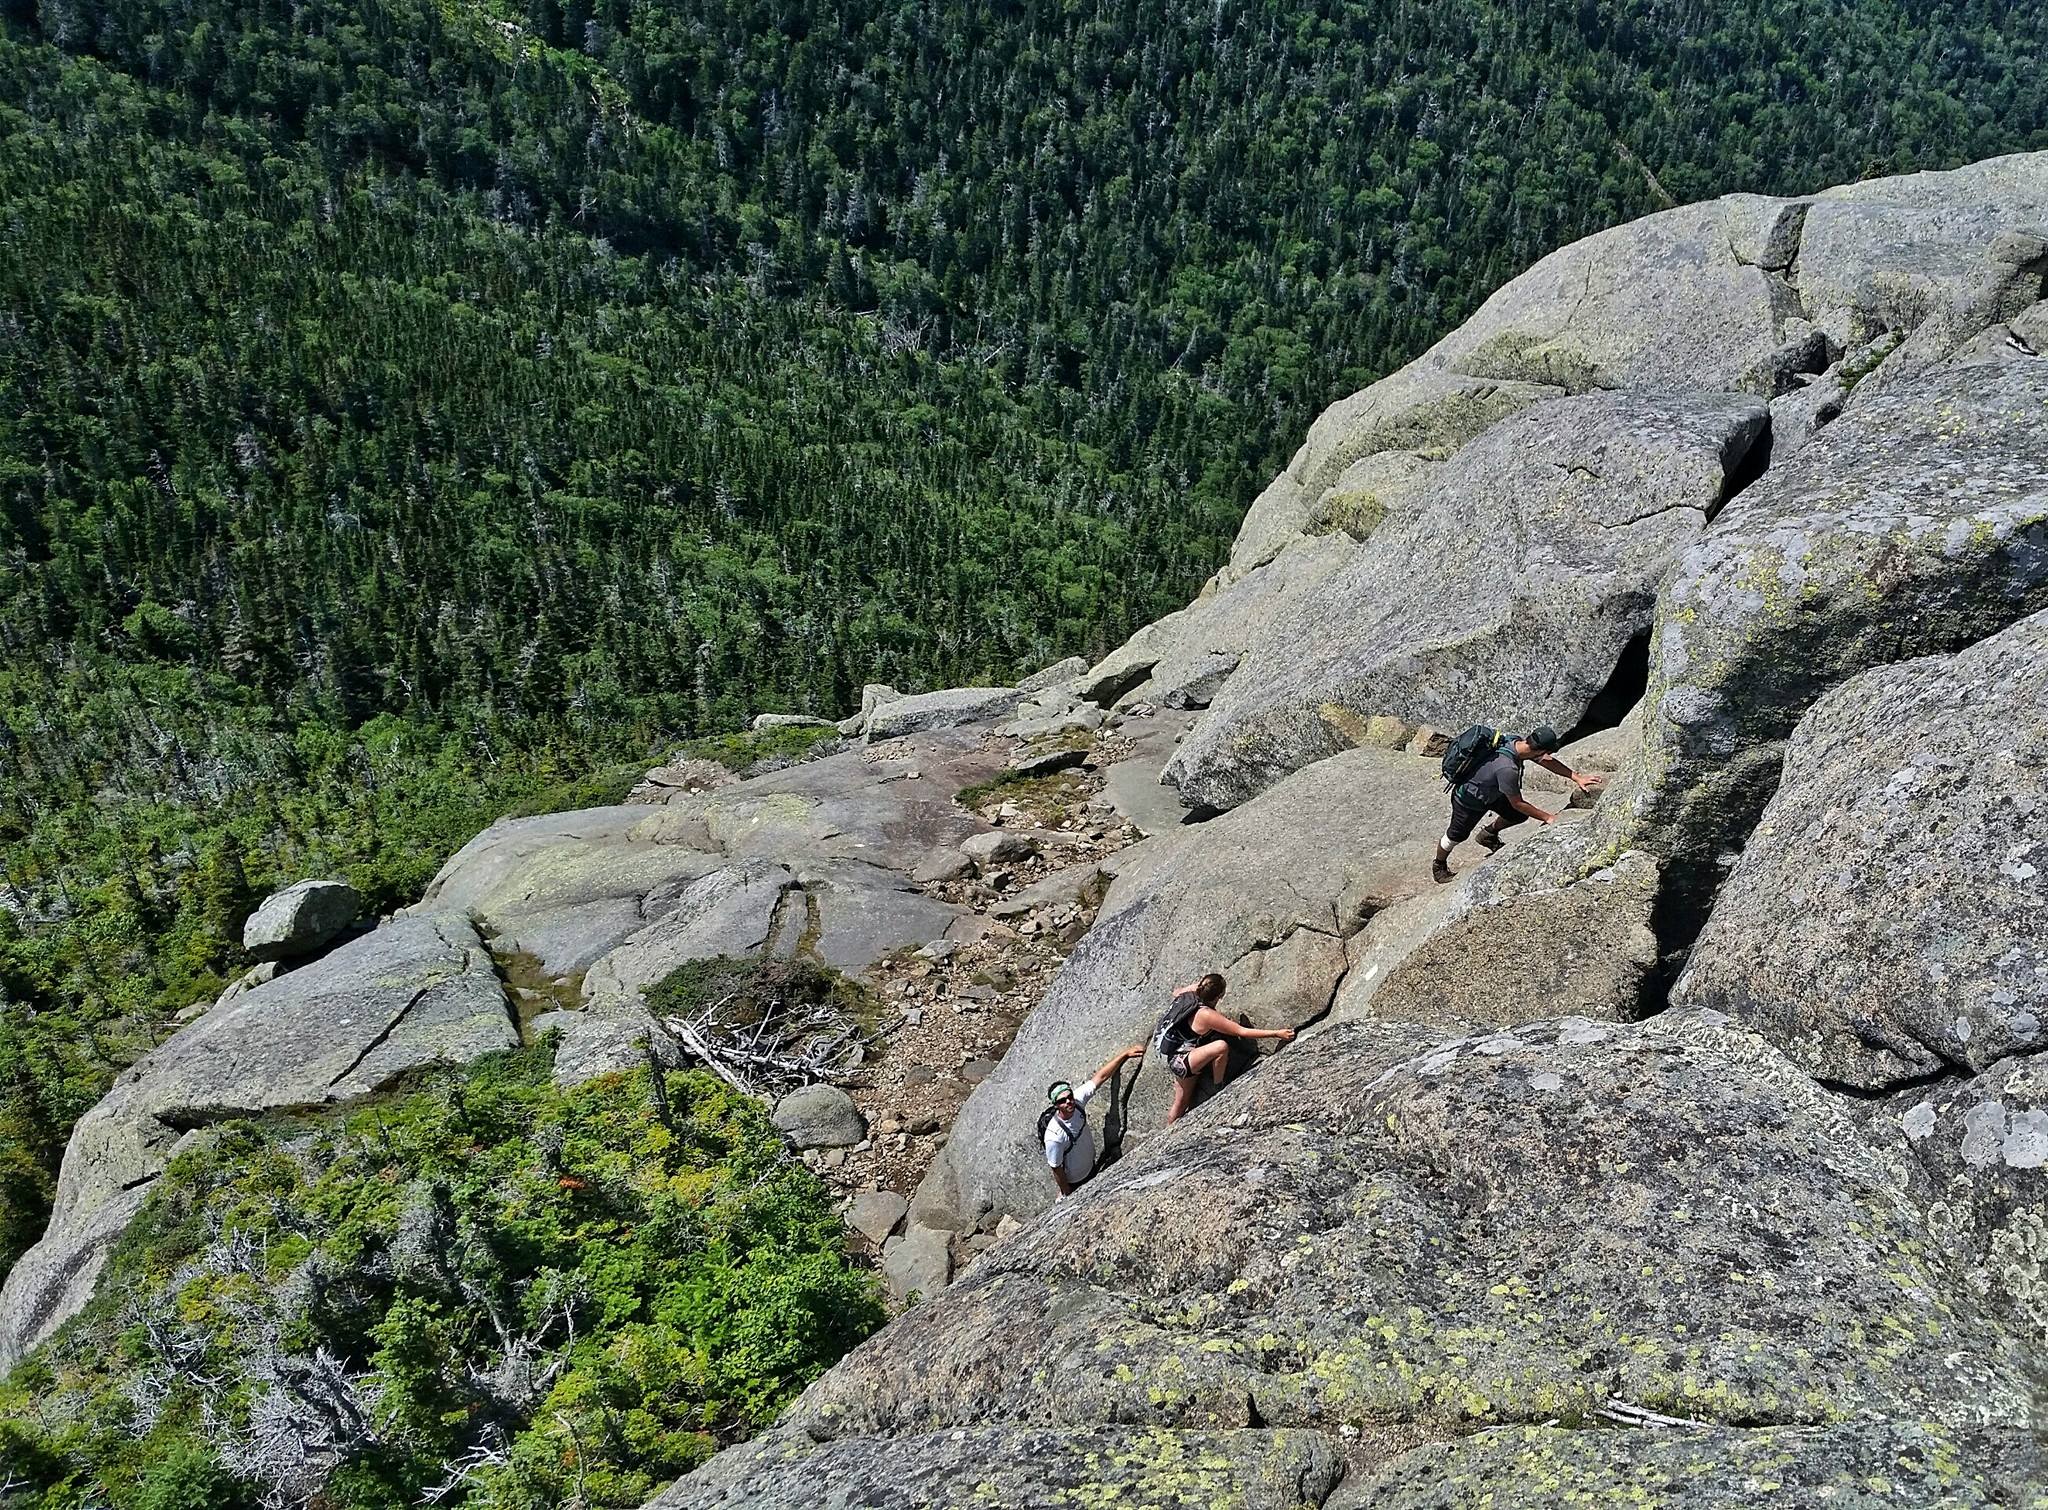 Three hikers scramble up vertical rocks on the side of a mountain.